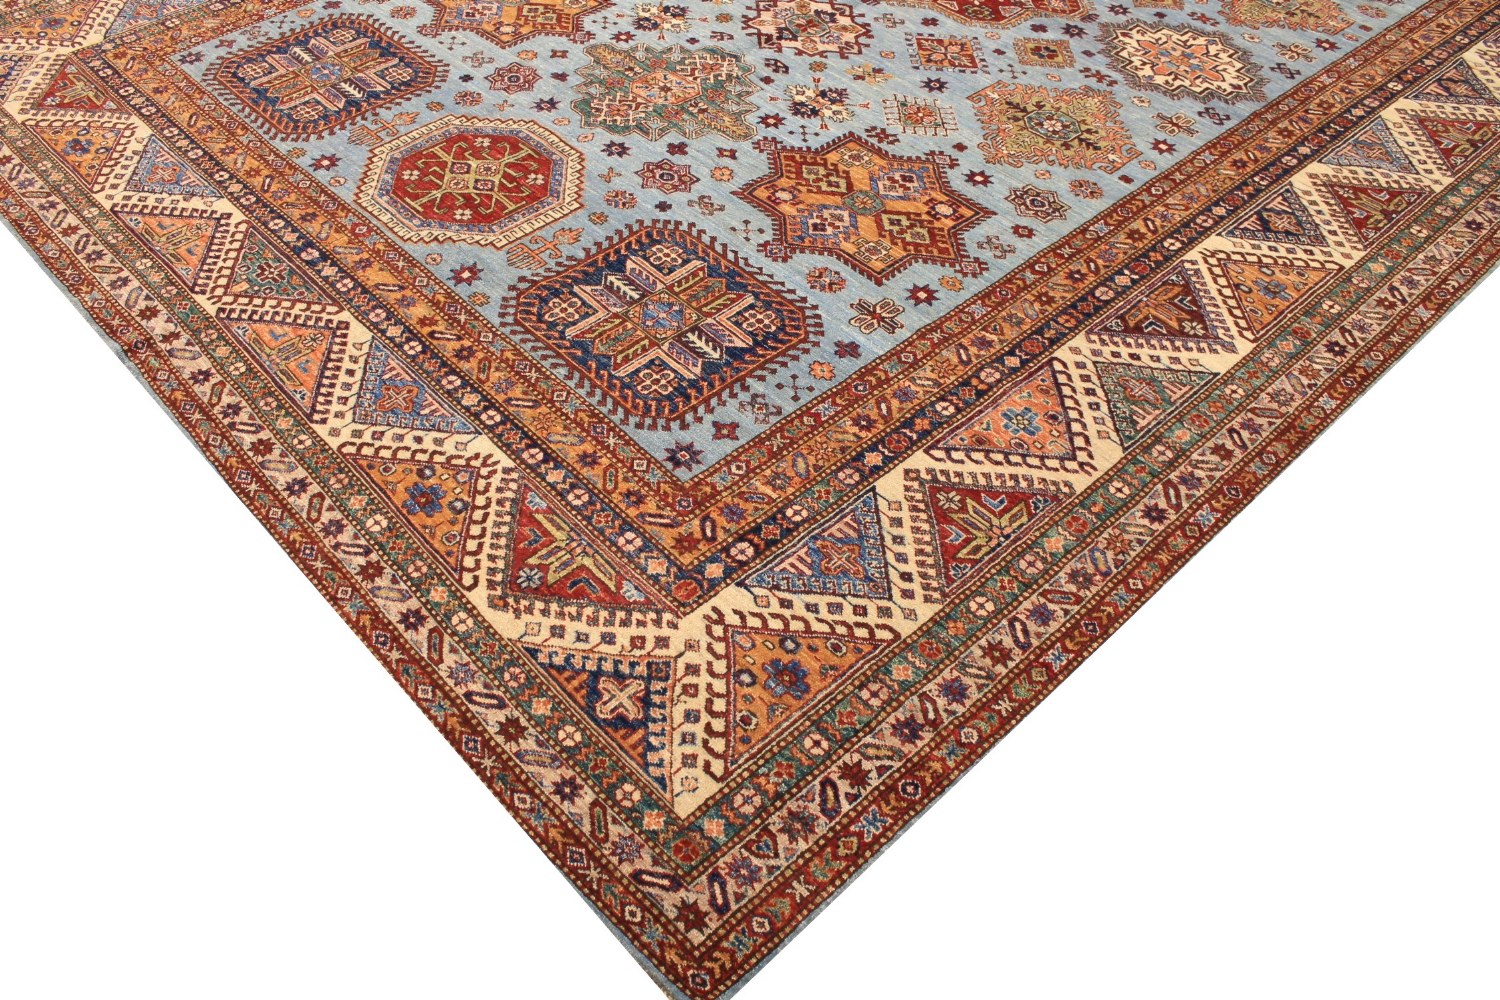 10x14 Kazak Hand Knotted Wool Area Rug - MR026193